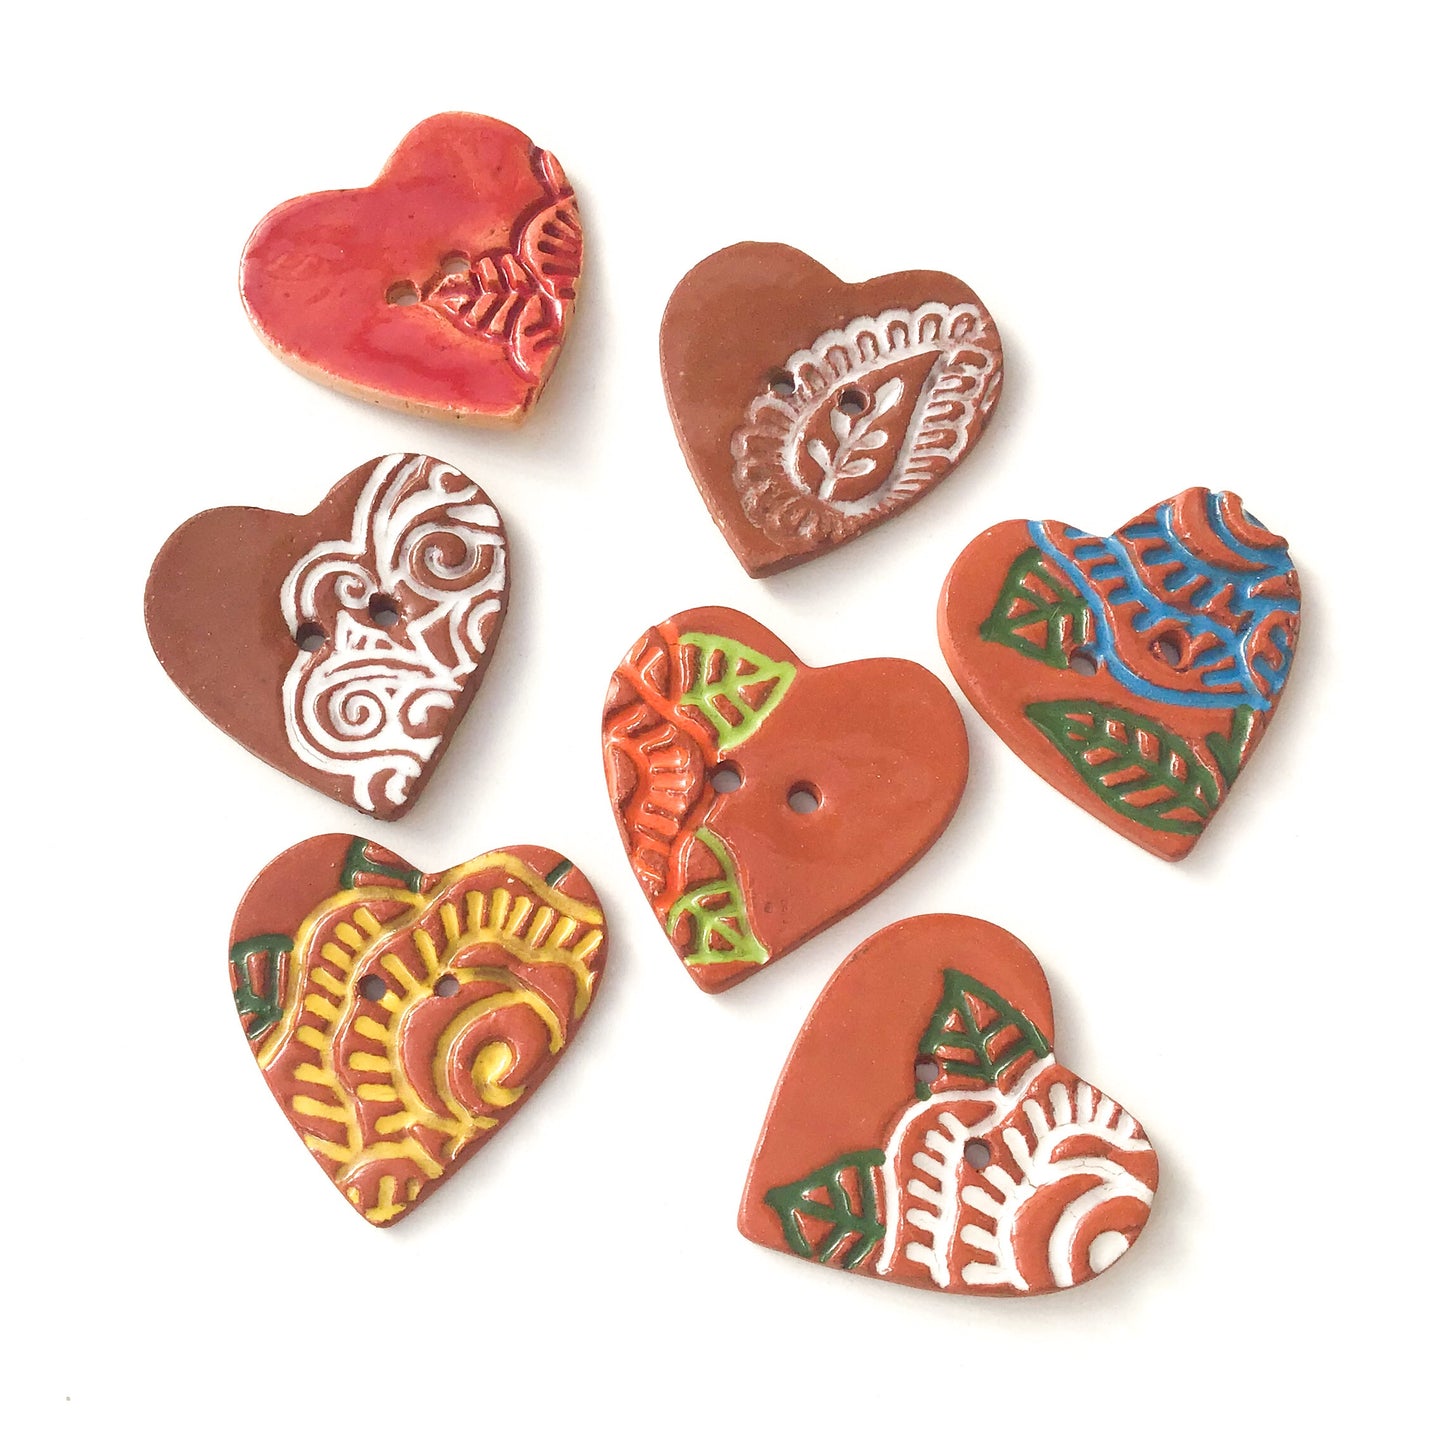 Large Stamped Heart Buttons - Painted Flowers Ceramic Heart Button - 1 3/8"